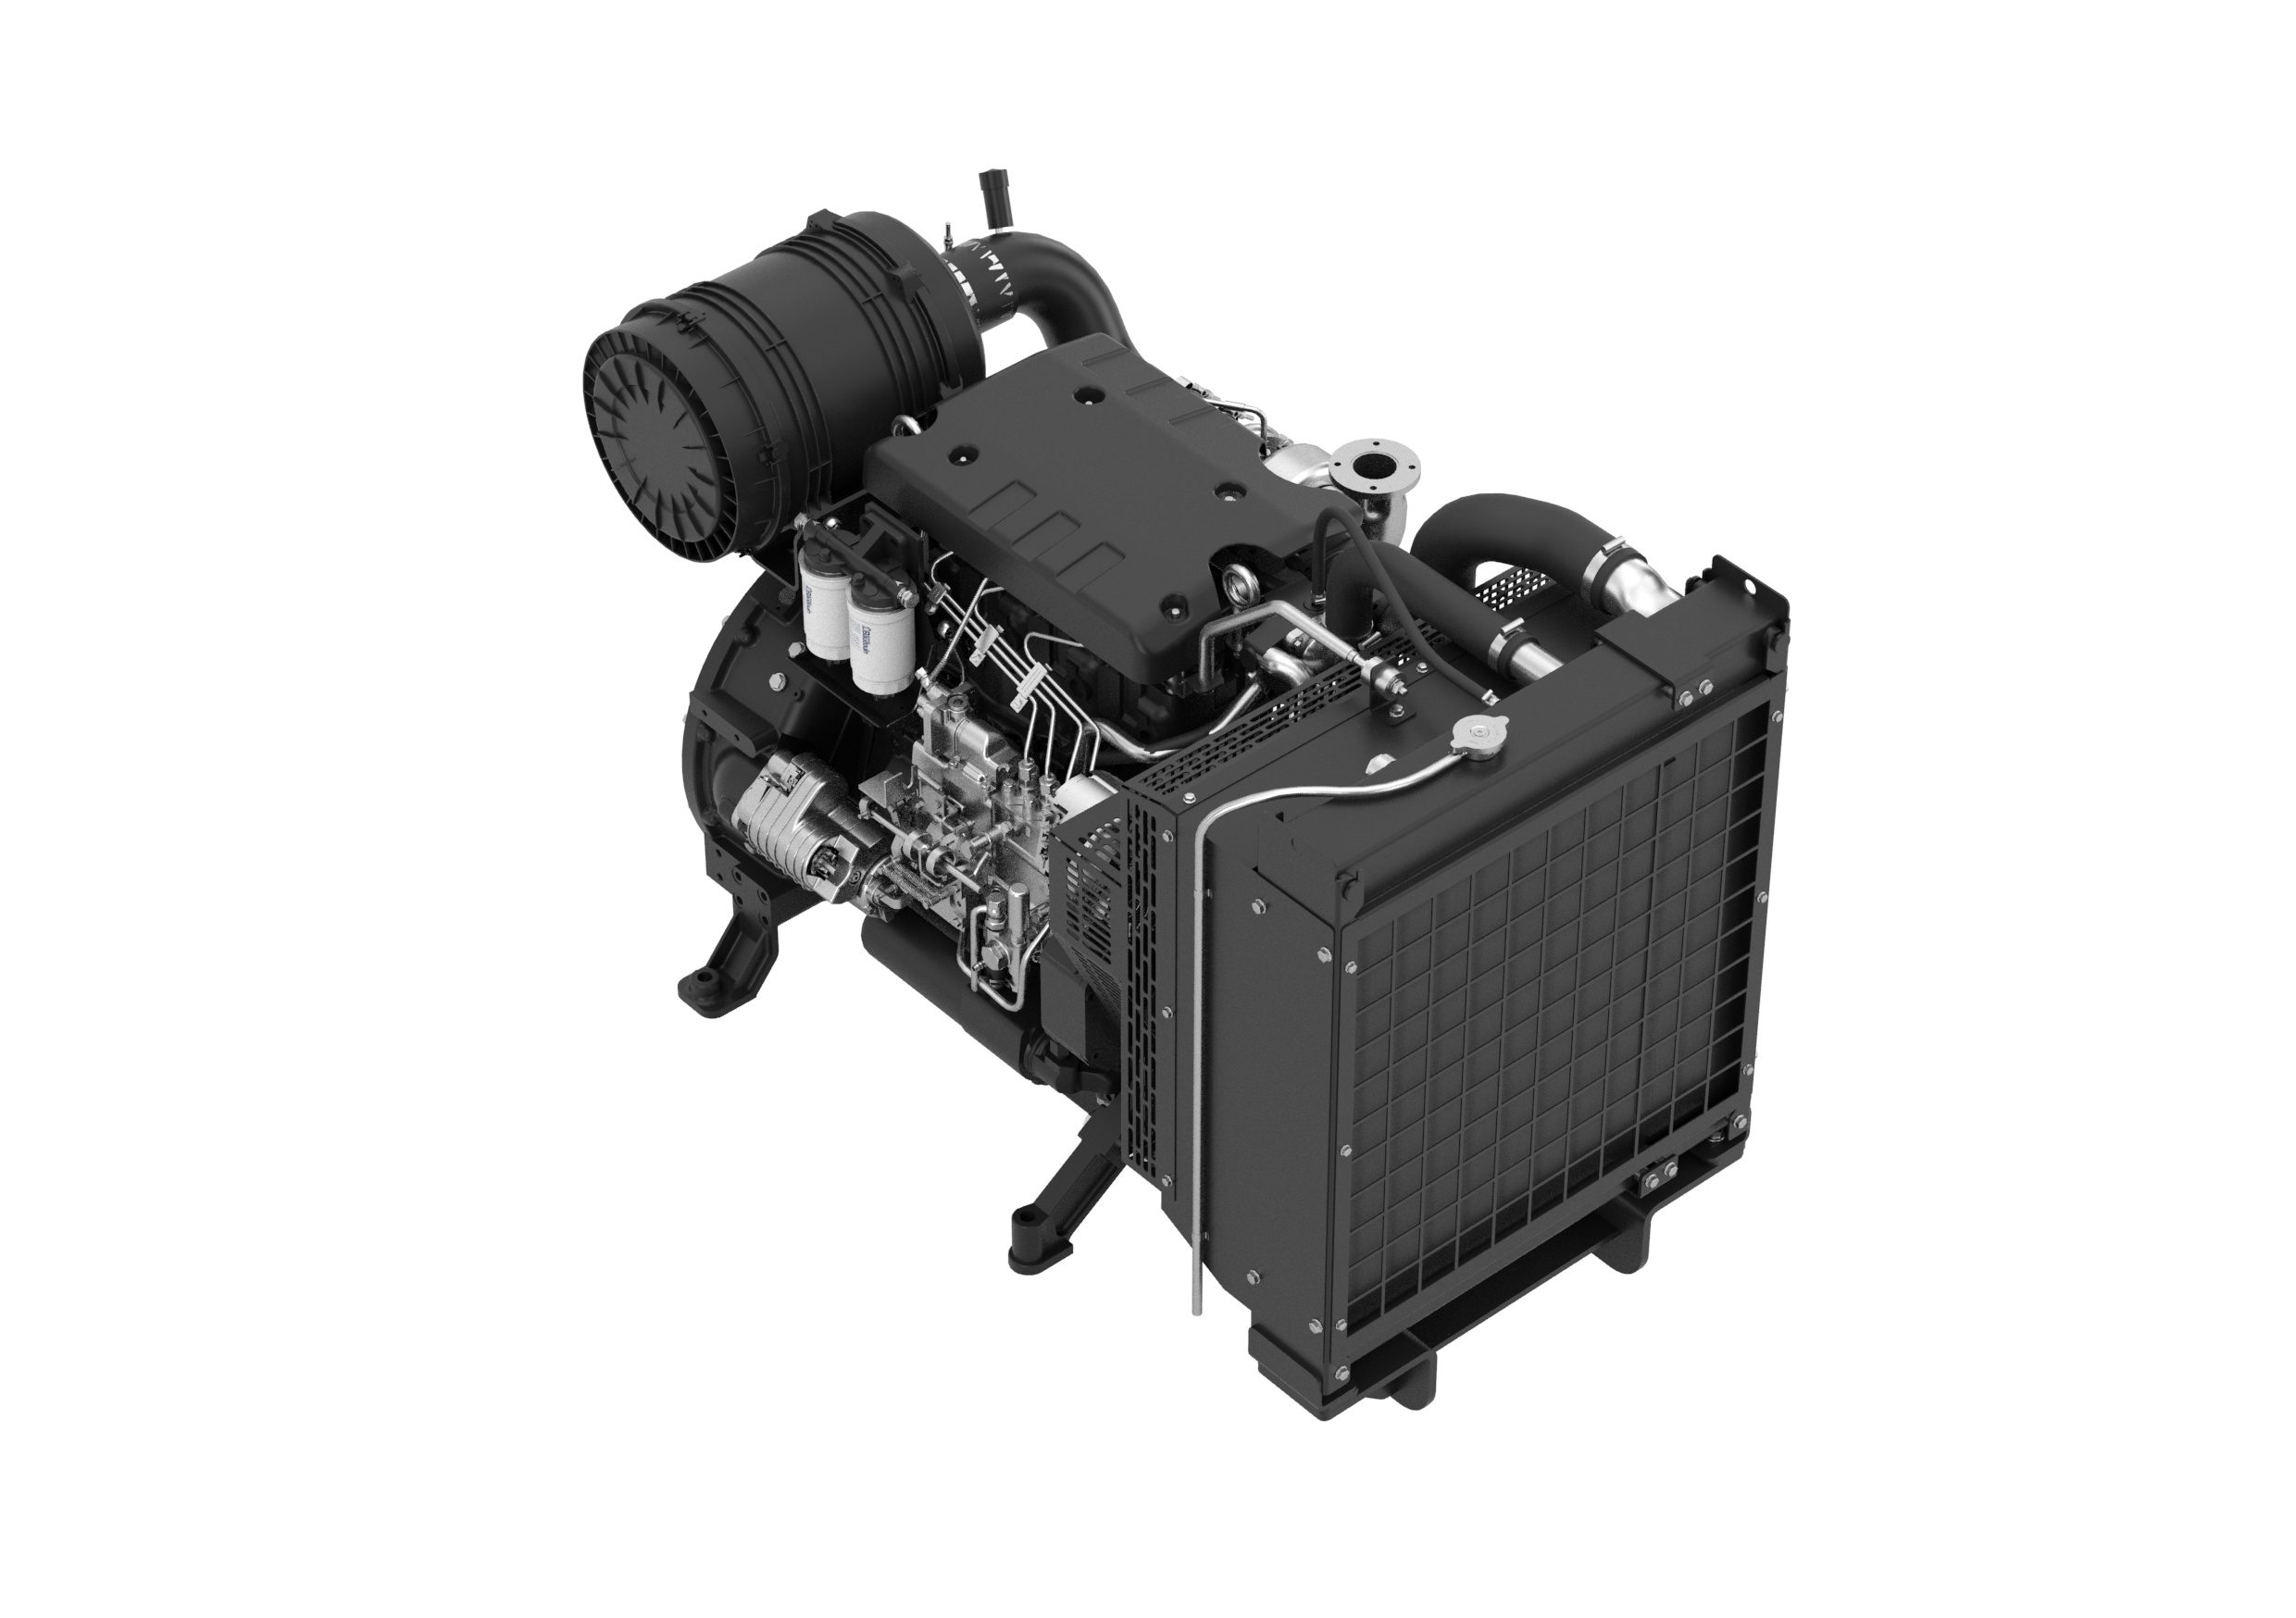 Baudouin and Power Systems International (PSI) are partnering to provide rich burn gas engines to the EMEA markets. The partnership is a perfect complement to Baudouin’s PowerKit diesel and lean burn gas product lines. It means Baudouin can deliver across the full spectrum of power solutions and provides even more choice for our customers.